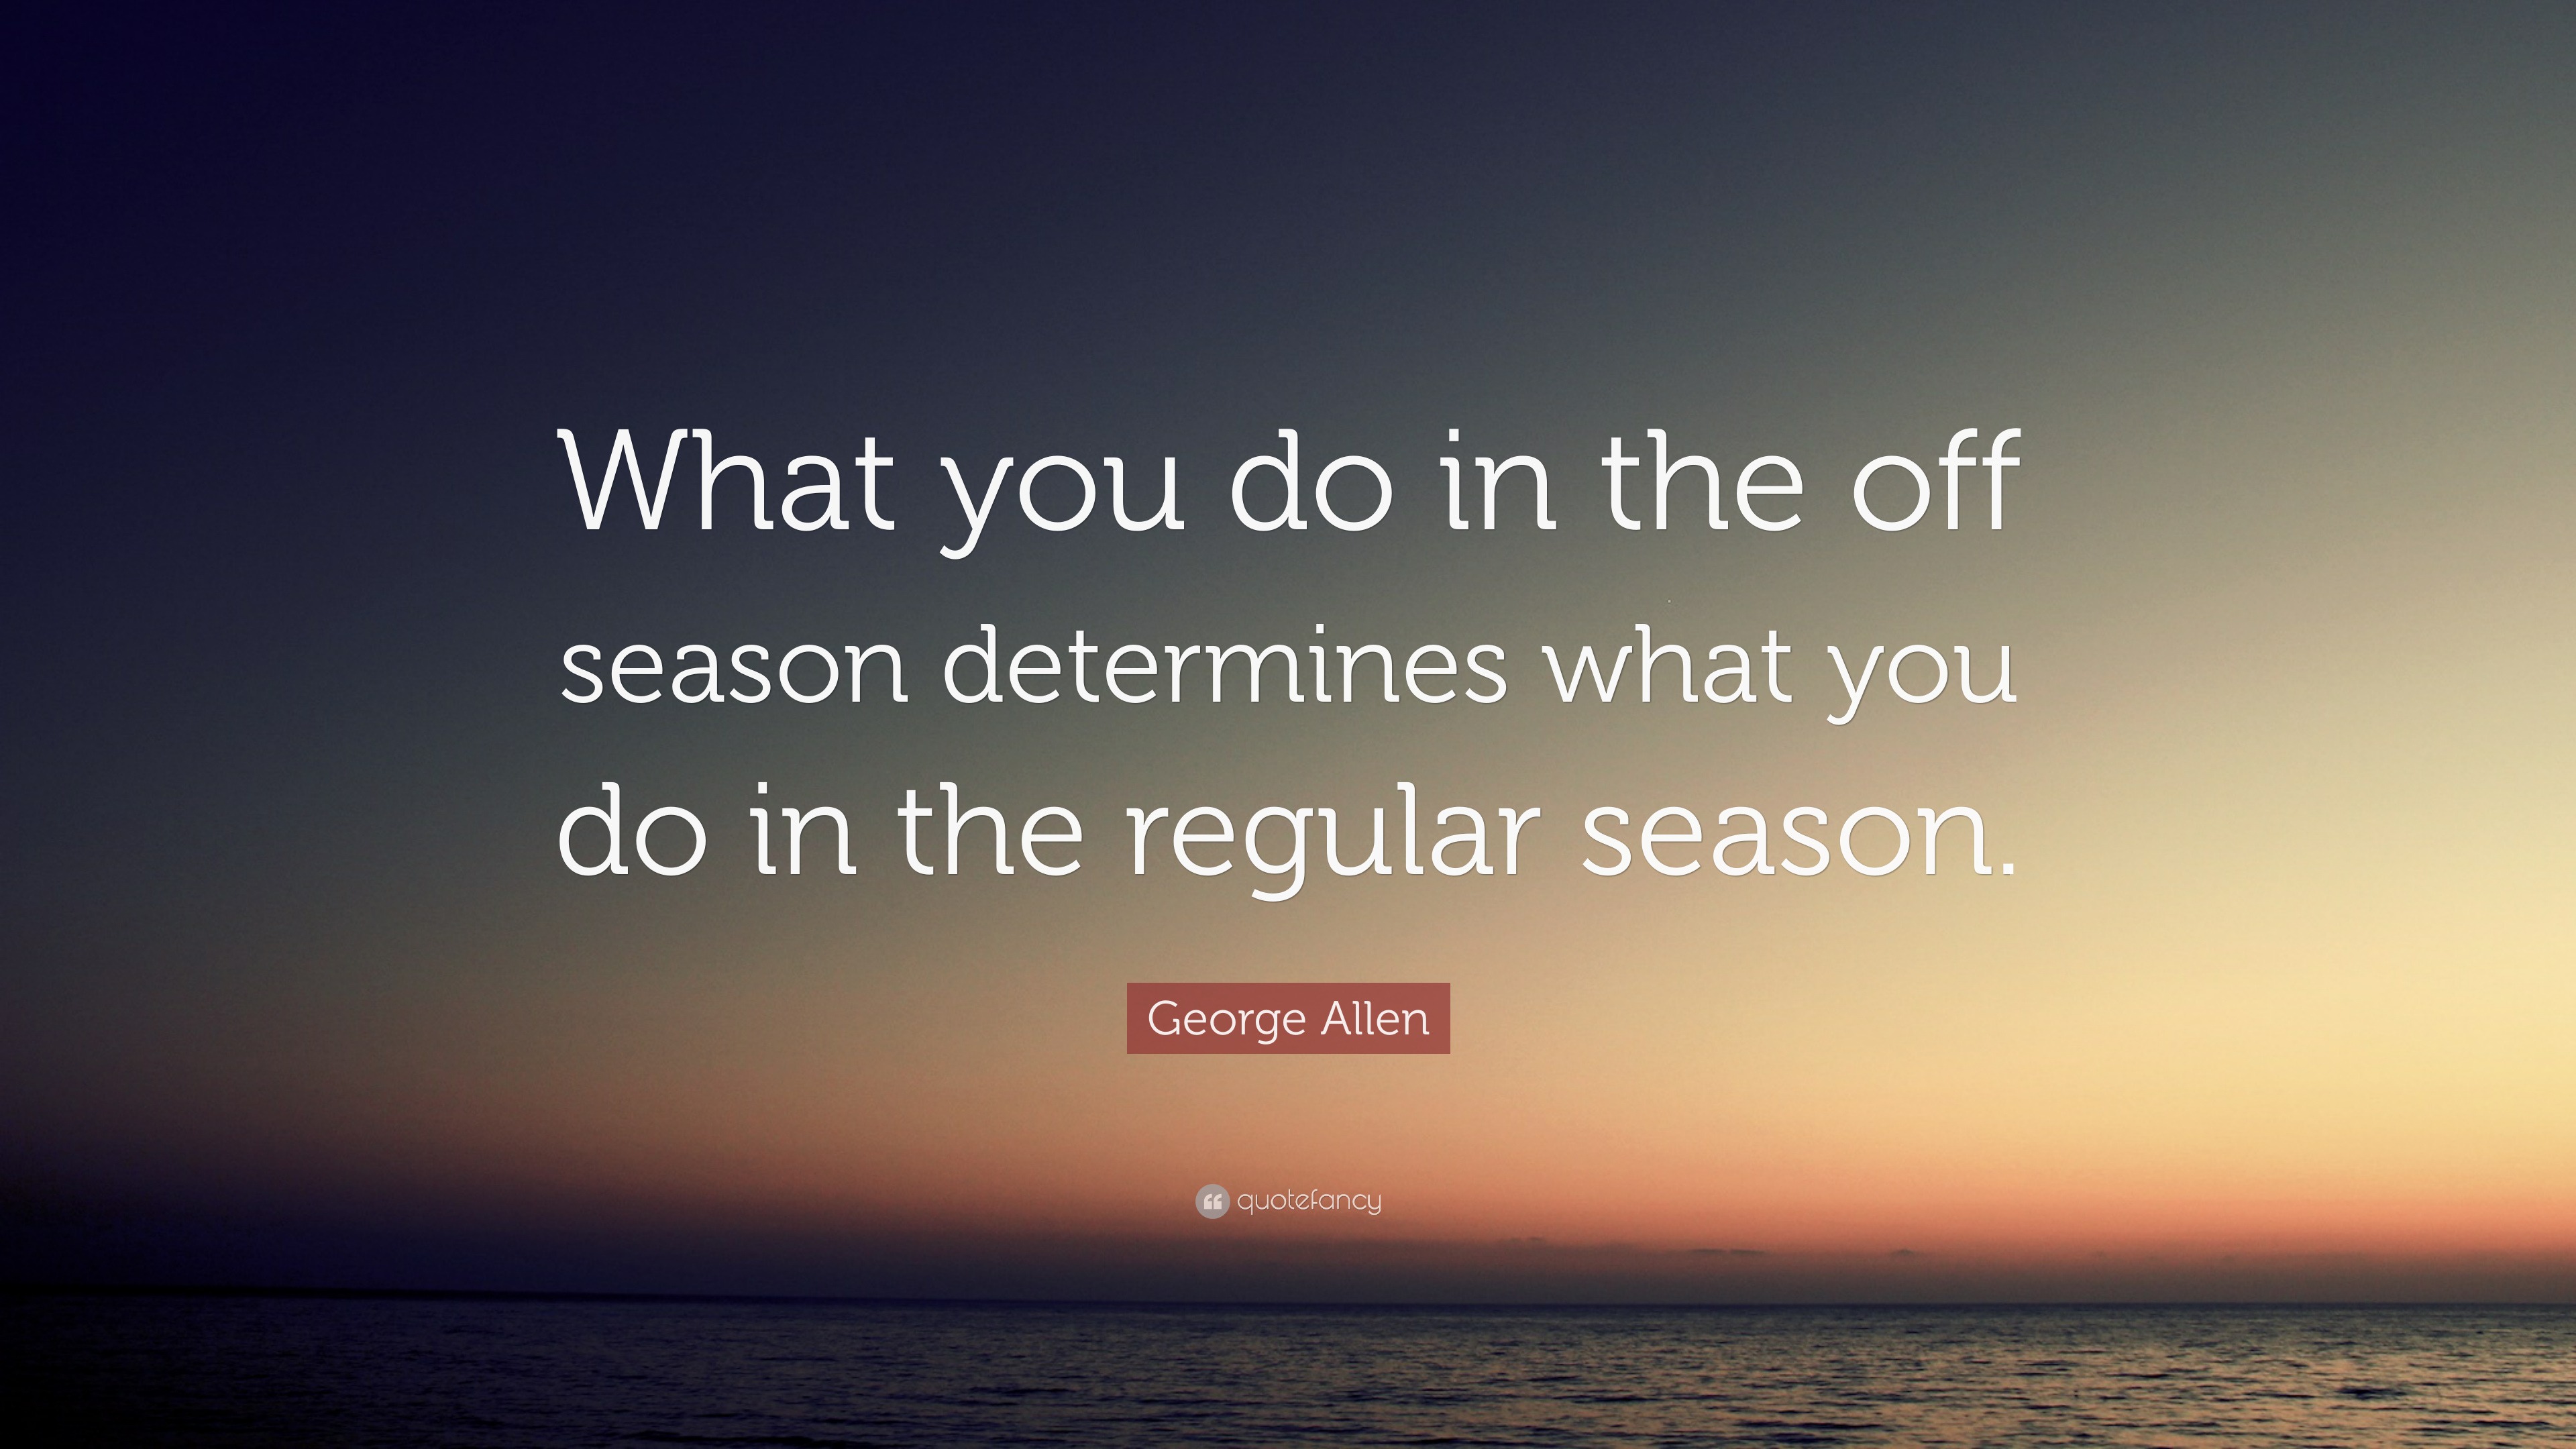 George Allen Quote What you do in the off season determines what you do  in the